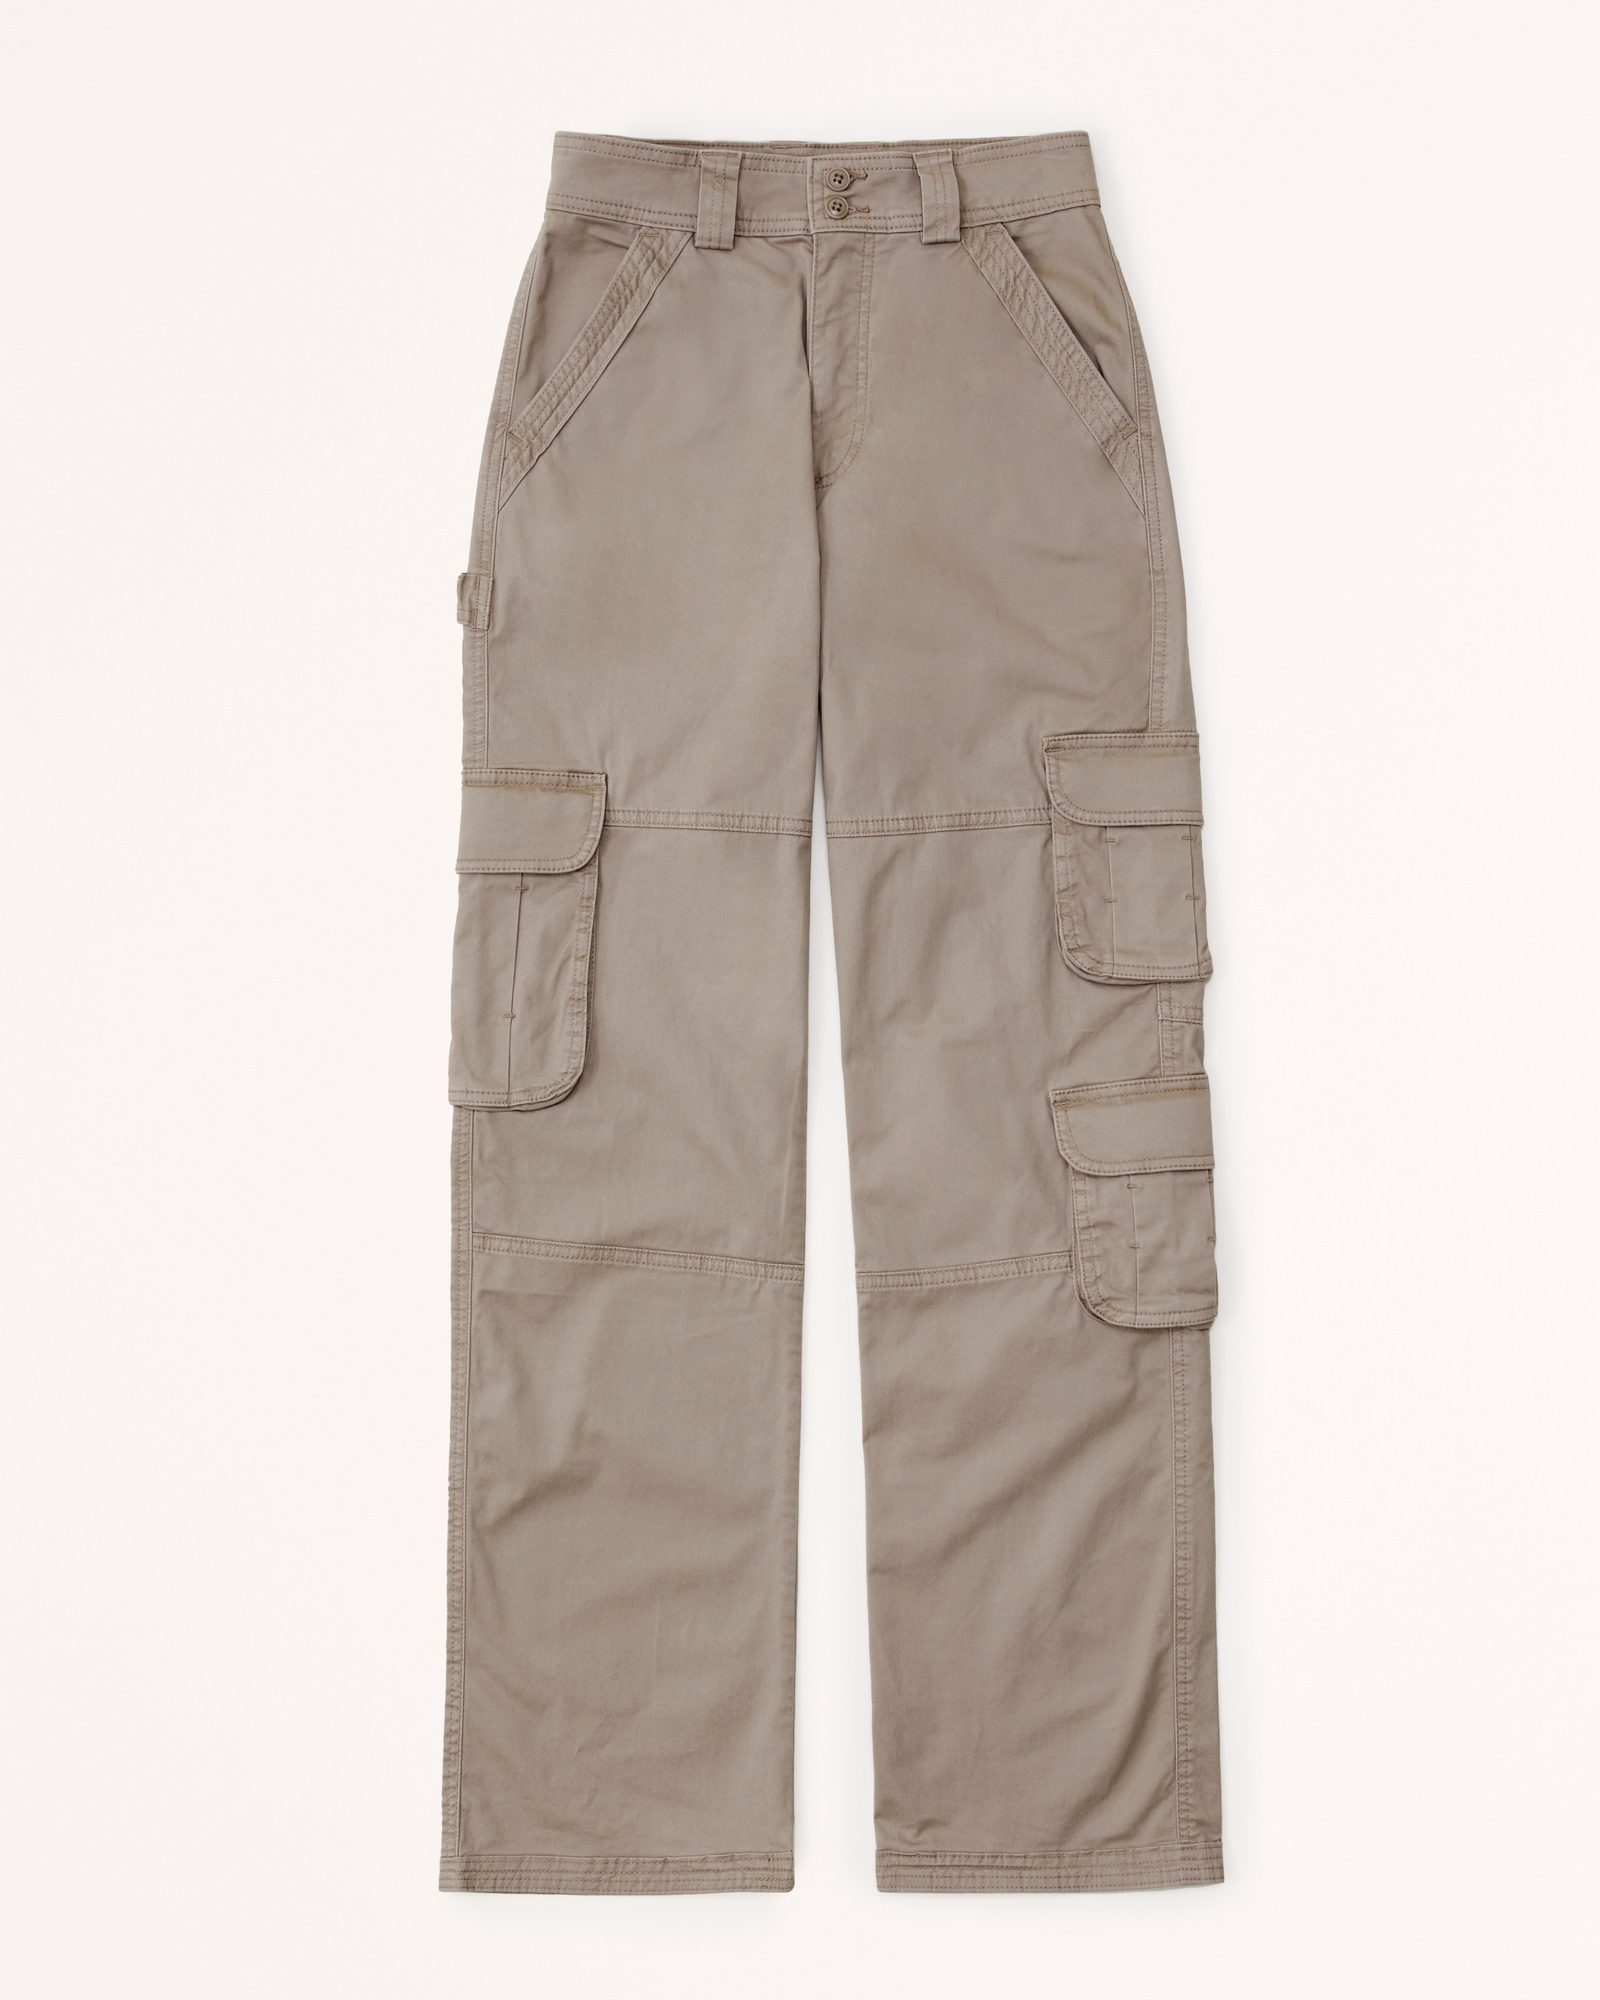 Abercrombie's cargo pants review…. ITS GOOD 👏🏻🙌🏻 #cargopants